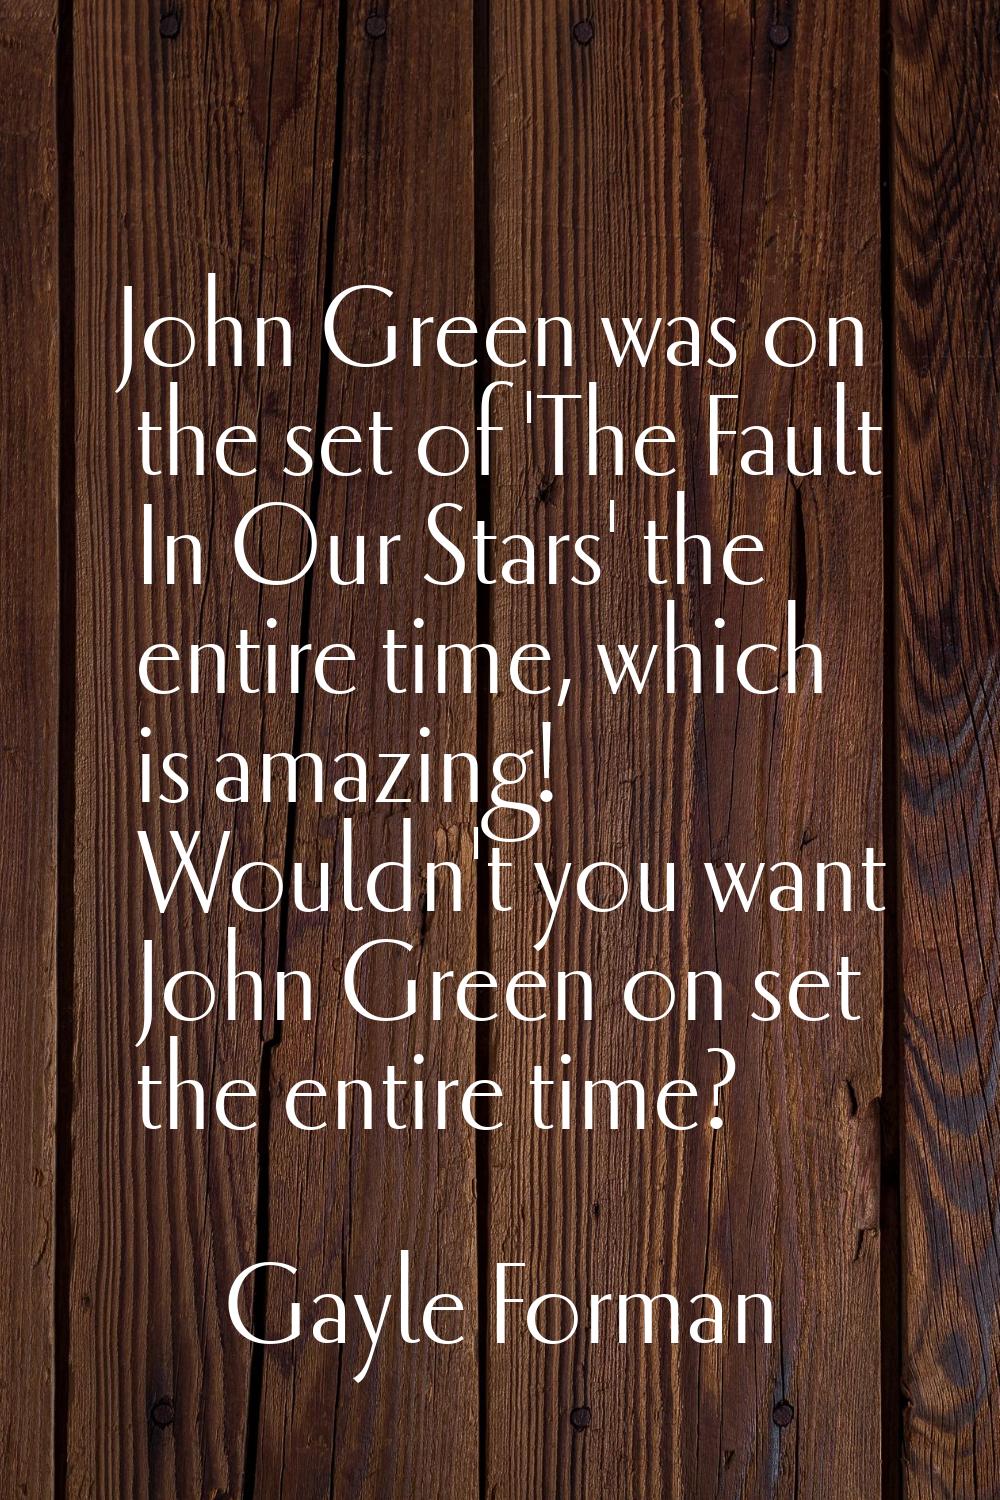 John Green was on the set of 'The Fault In Our Stars' the entire time, which is amazing! Wouldn't y